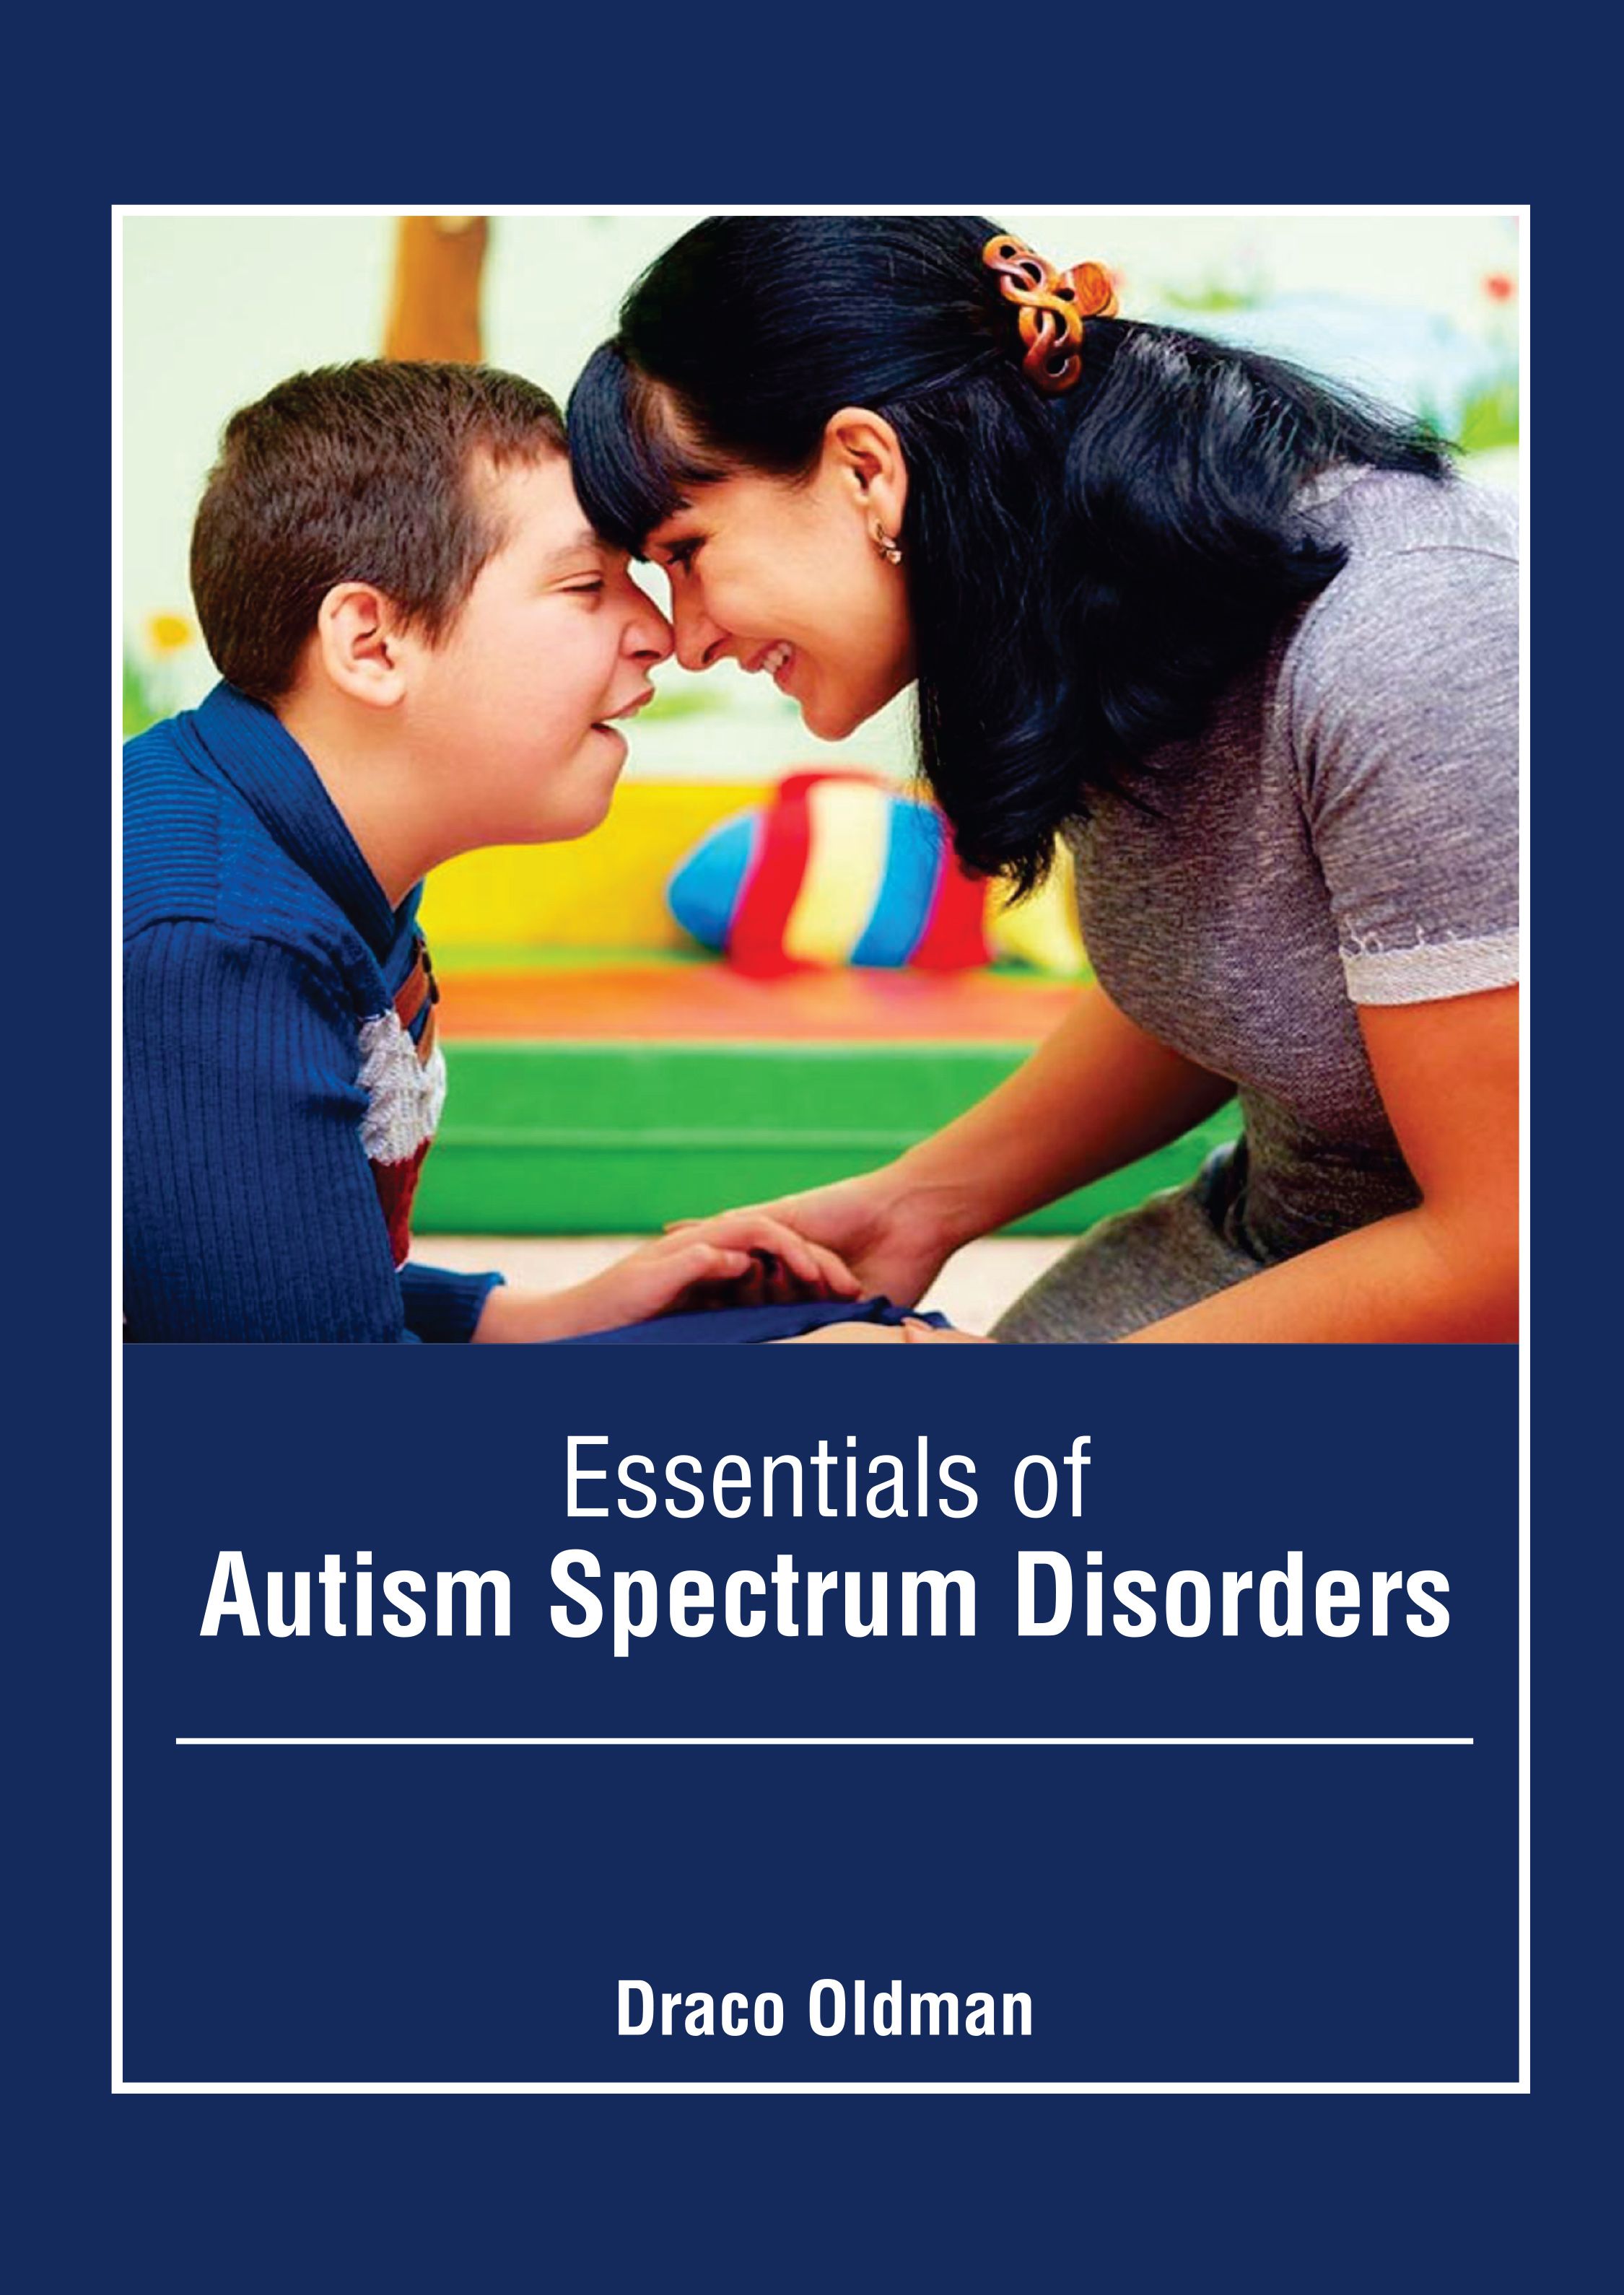 exclusive-publishers/american-medical-publishers/essentials-of-autism-spectrum-disorders-9798887401010